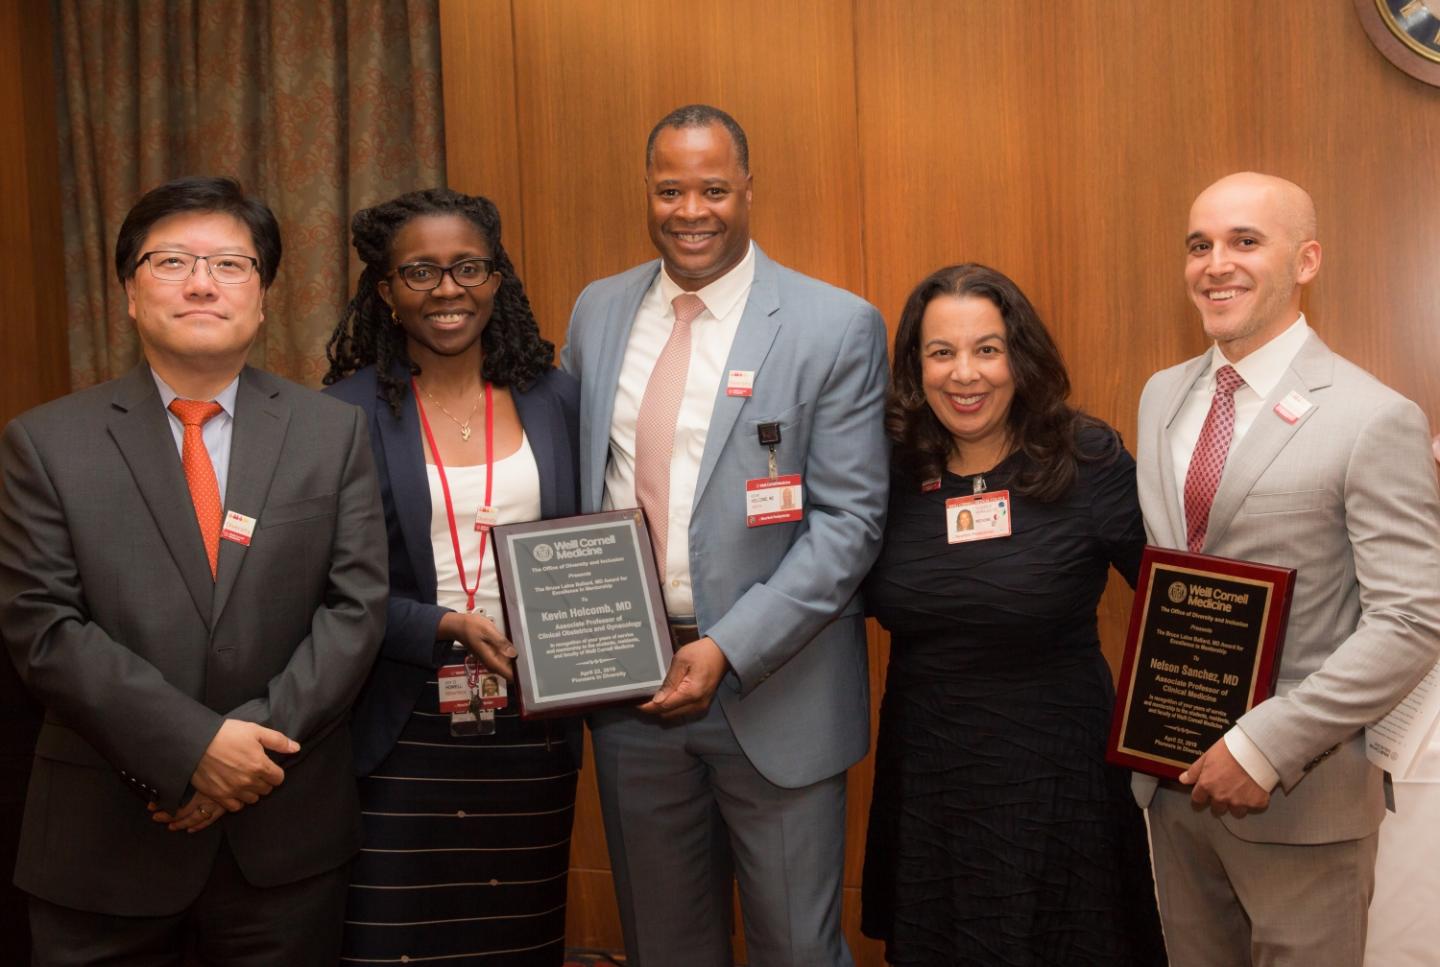 Weill Cornell Medicine has been awarded the Health Professions Higher Education Excellence in Diversity Award